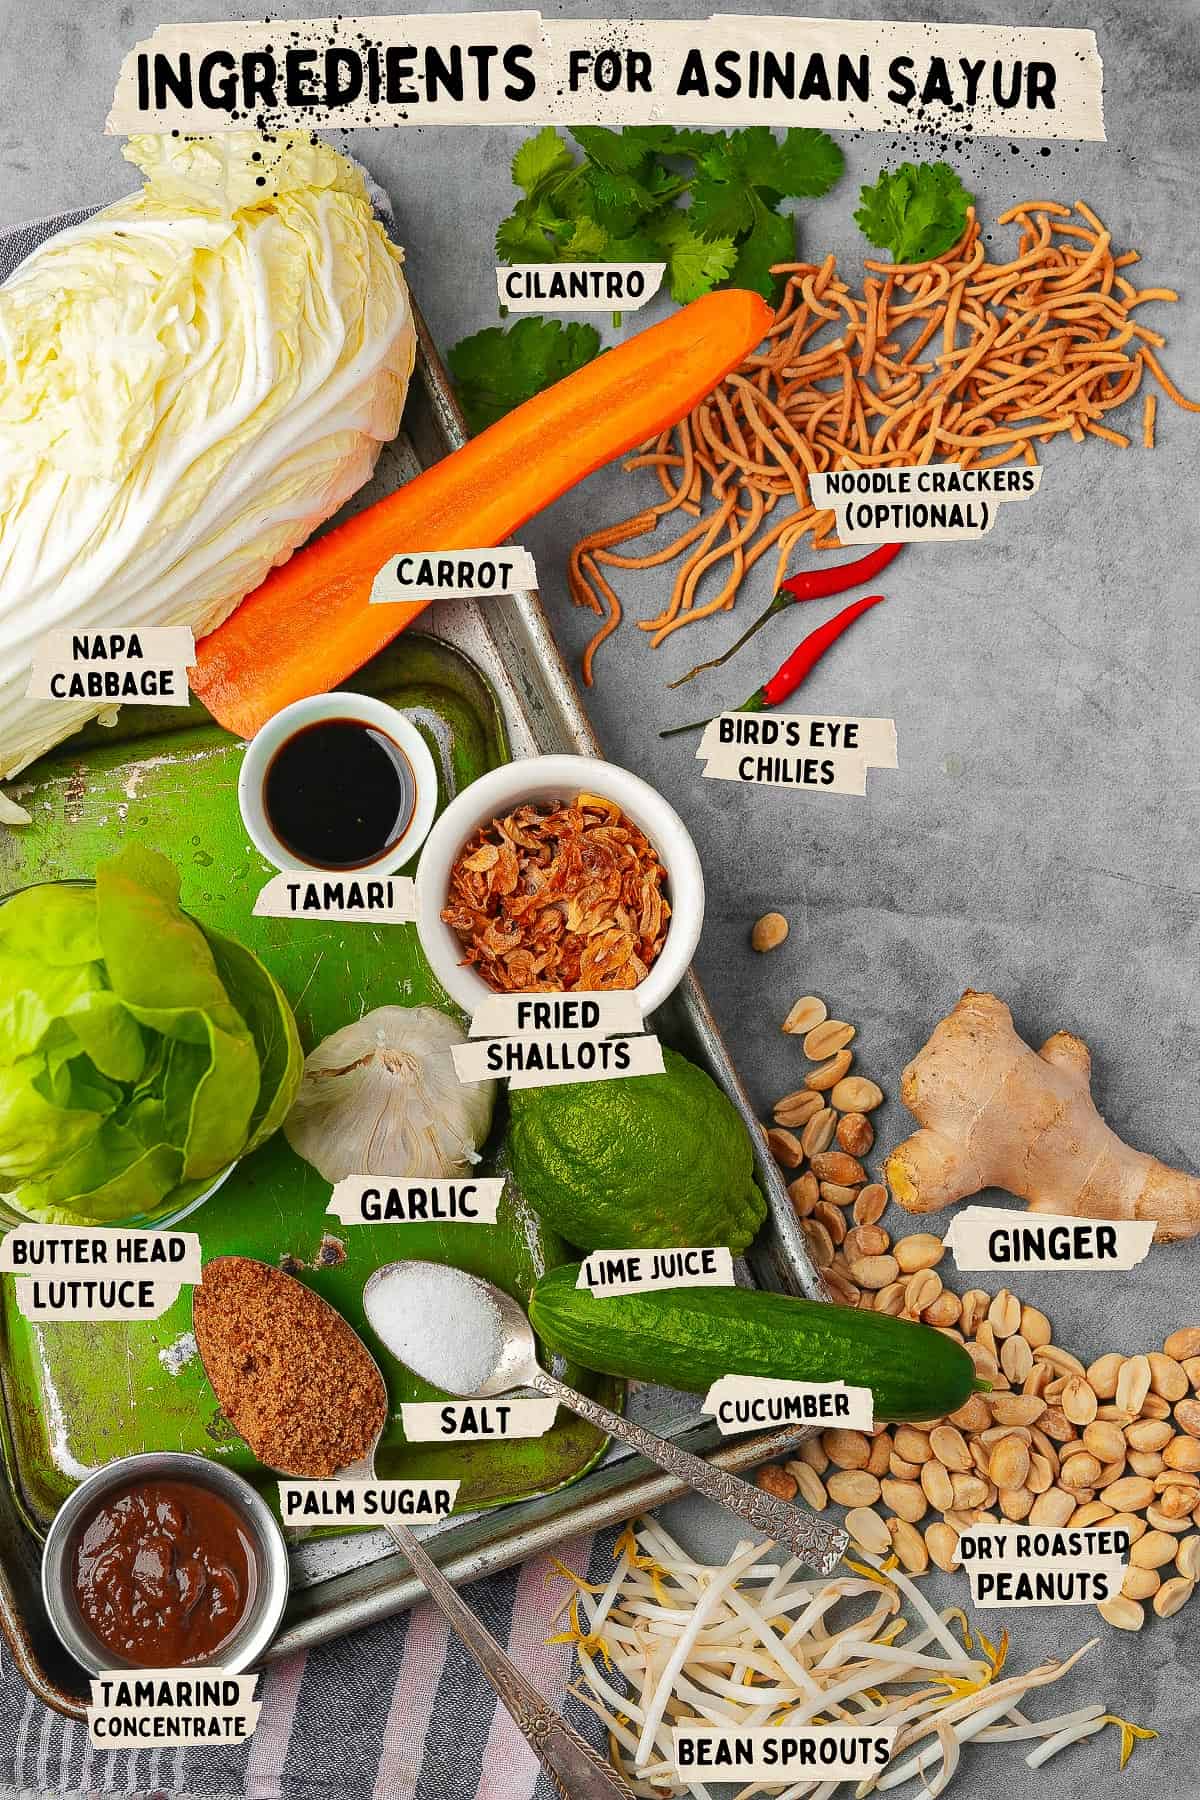 A list of ingredients for asinan sayur.